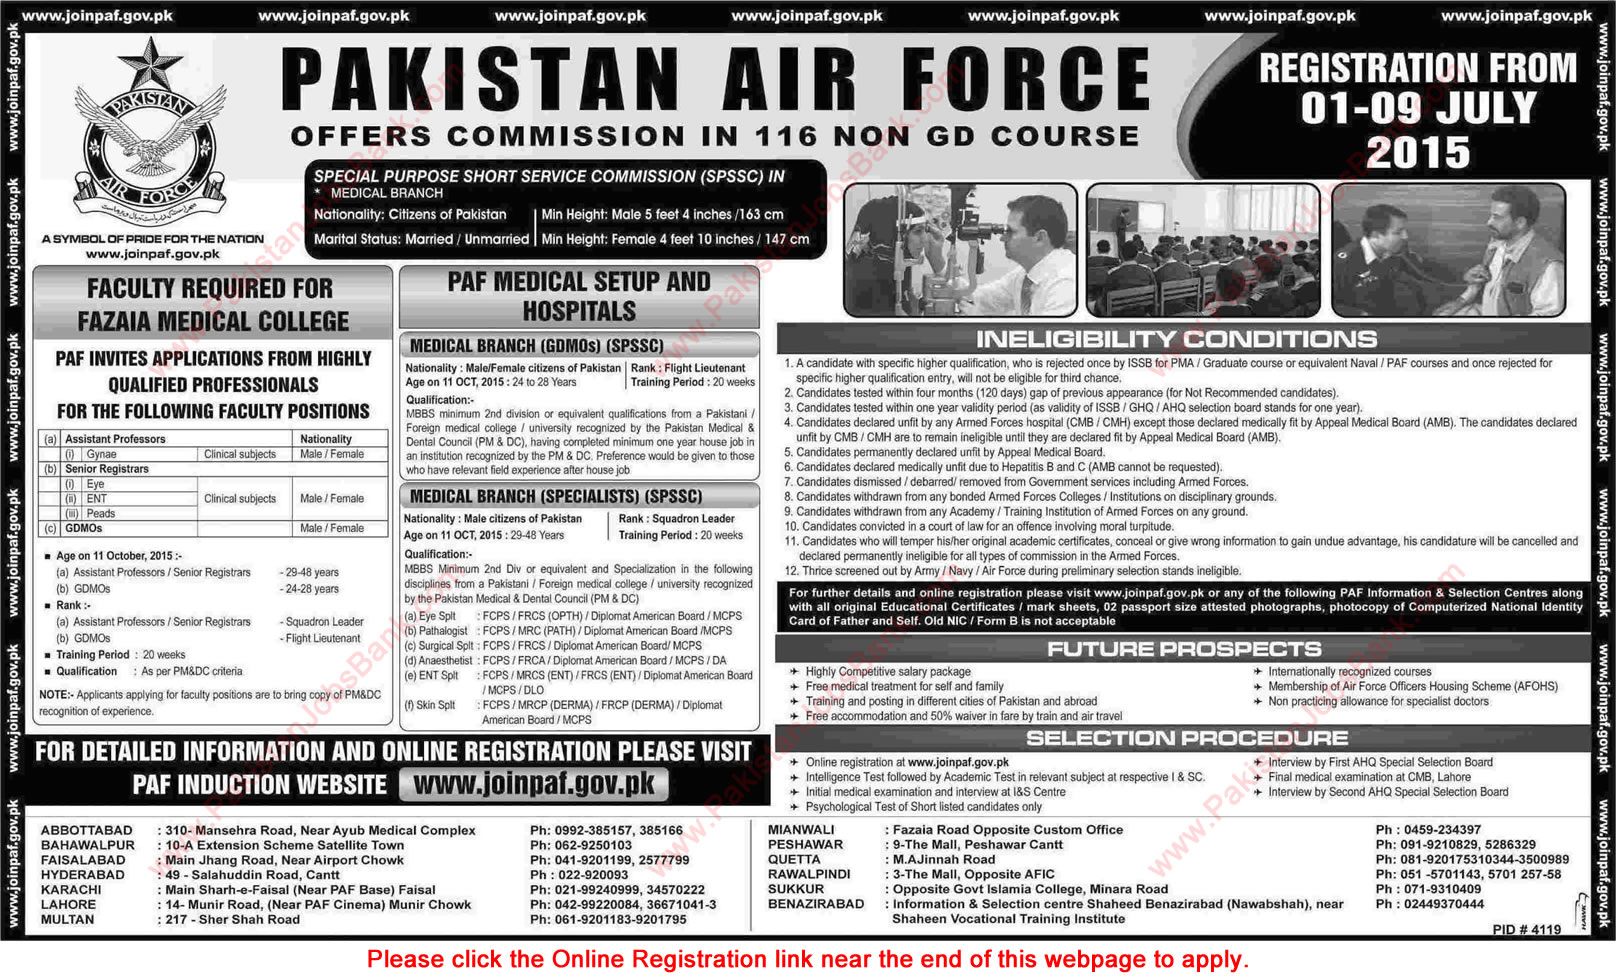 Join Pakistan Air Force 2015 July GDMO, Specialists & Medical Faculty Online Registration 116 Non GD Course Commission